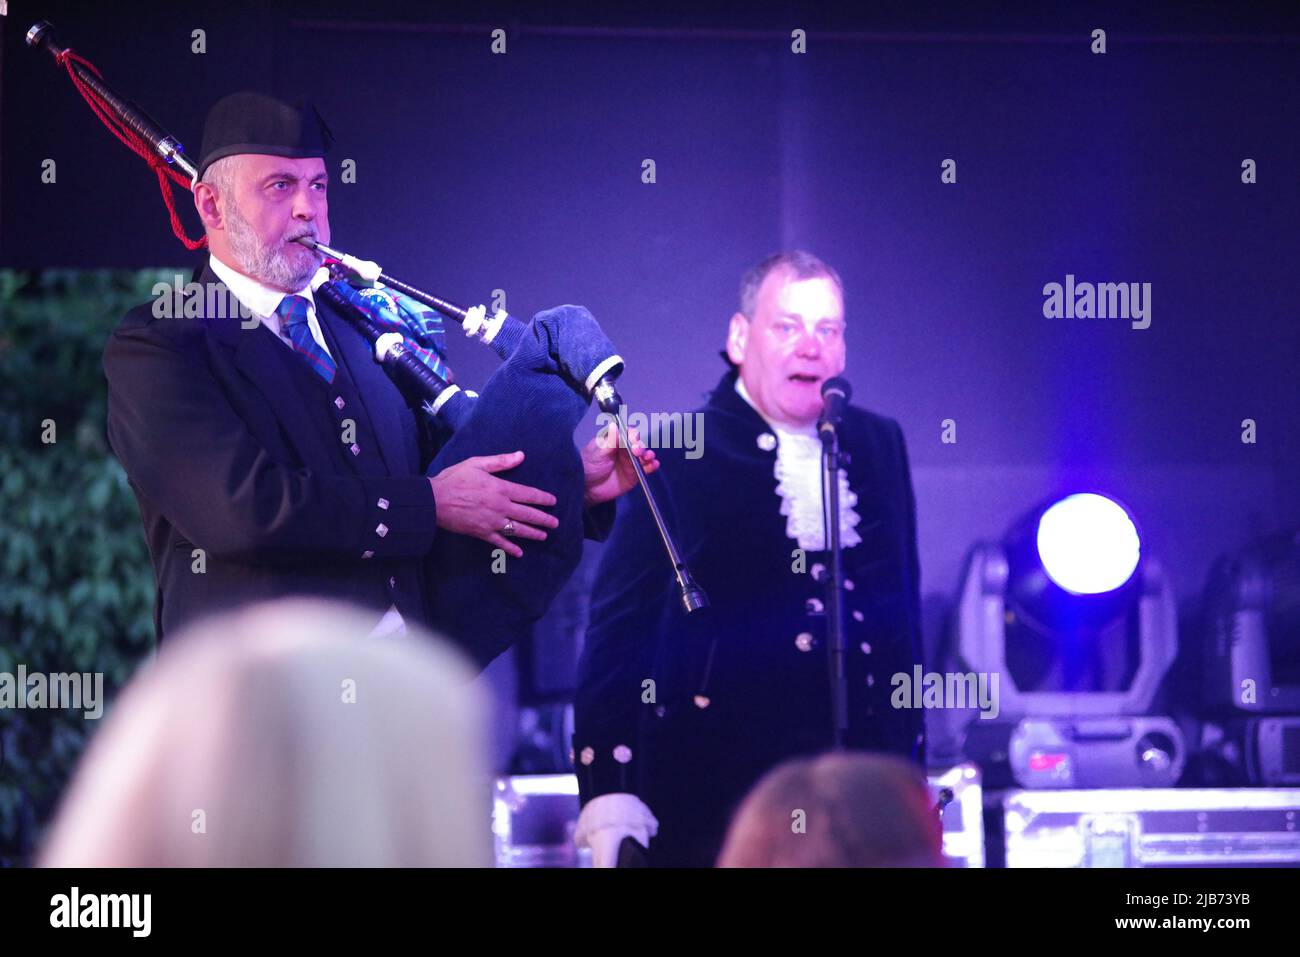 Wallsend, England, 2 June 2022. A piper being introduced by David Wilson Bavaird JP, High Sherriff of Tyne and Wear, during the Queen’s Platinum Jubilee event at Segedunum Roman Fort. Credit: Colin Edwards Stock Photo